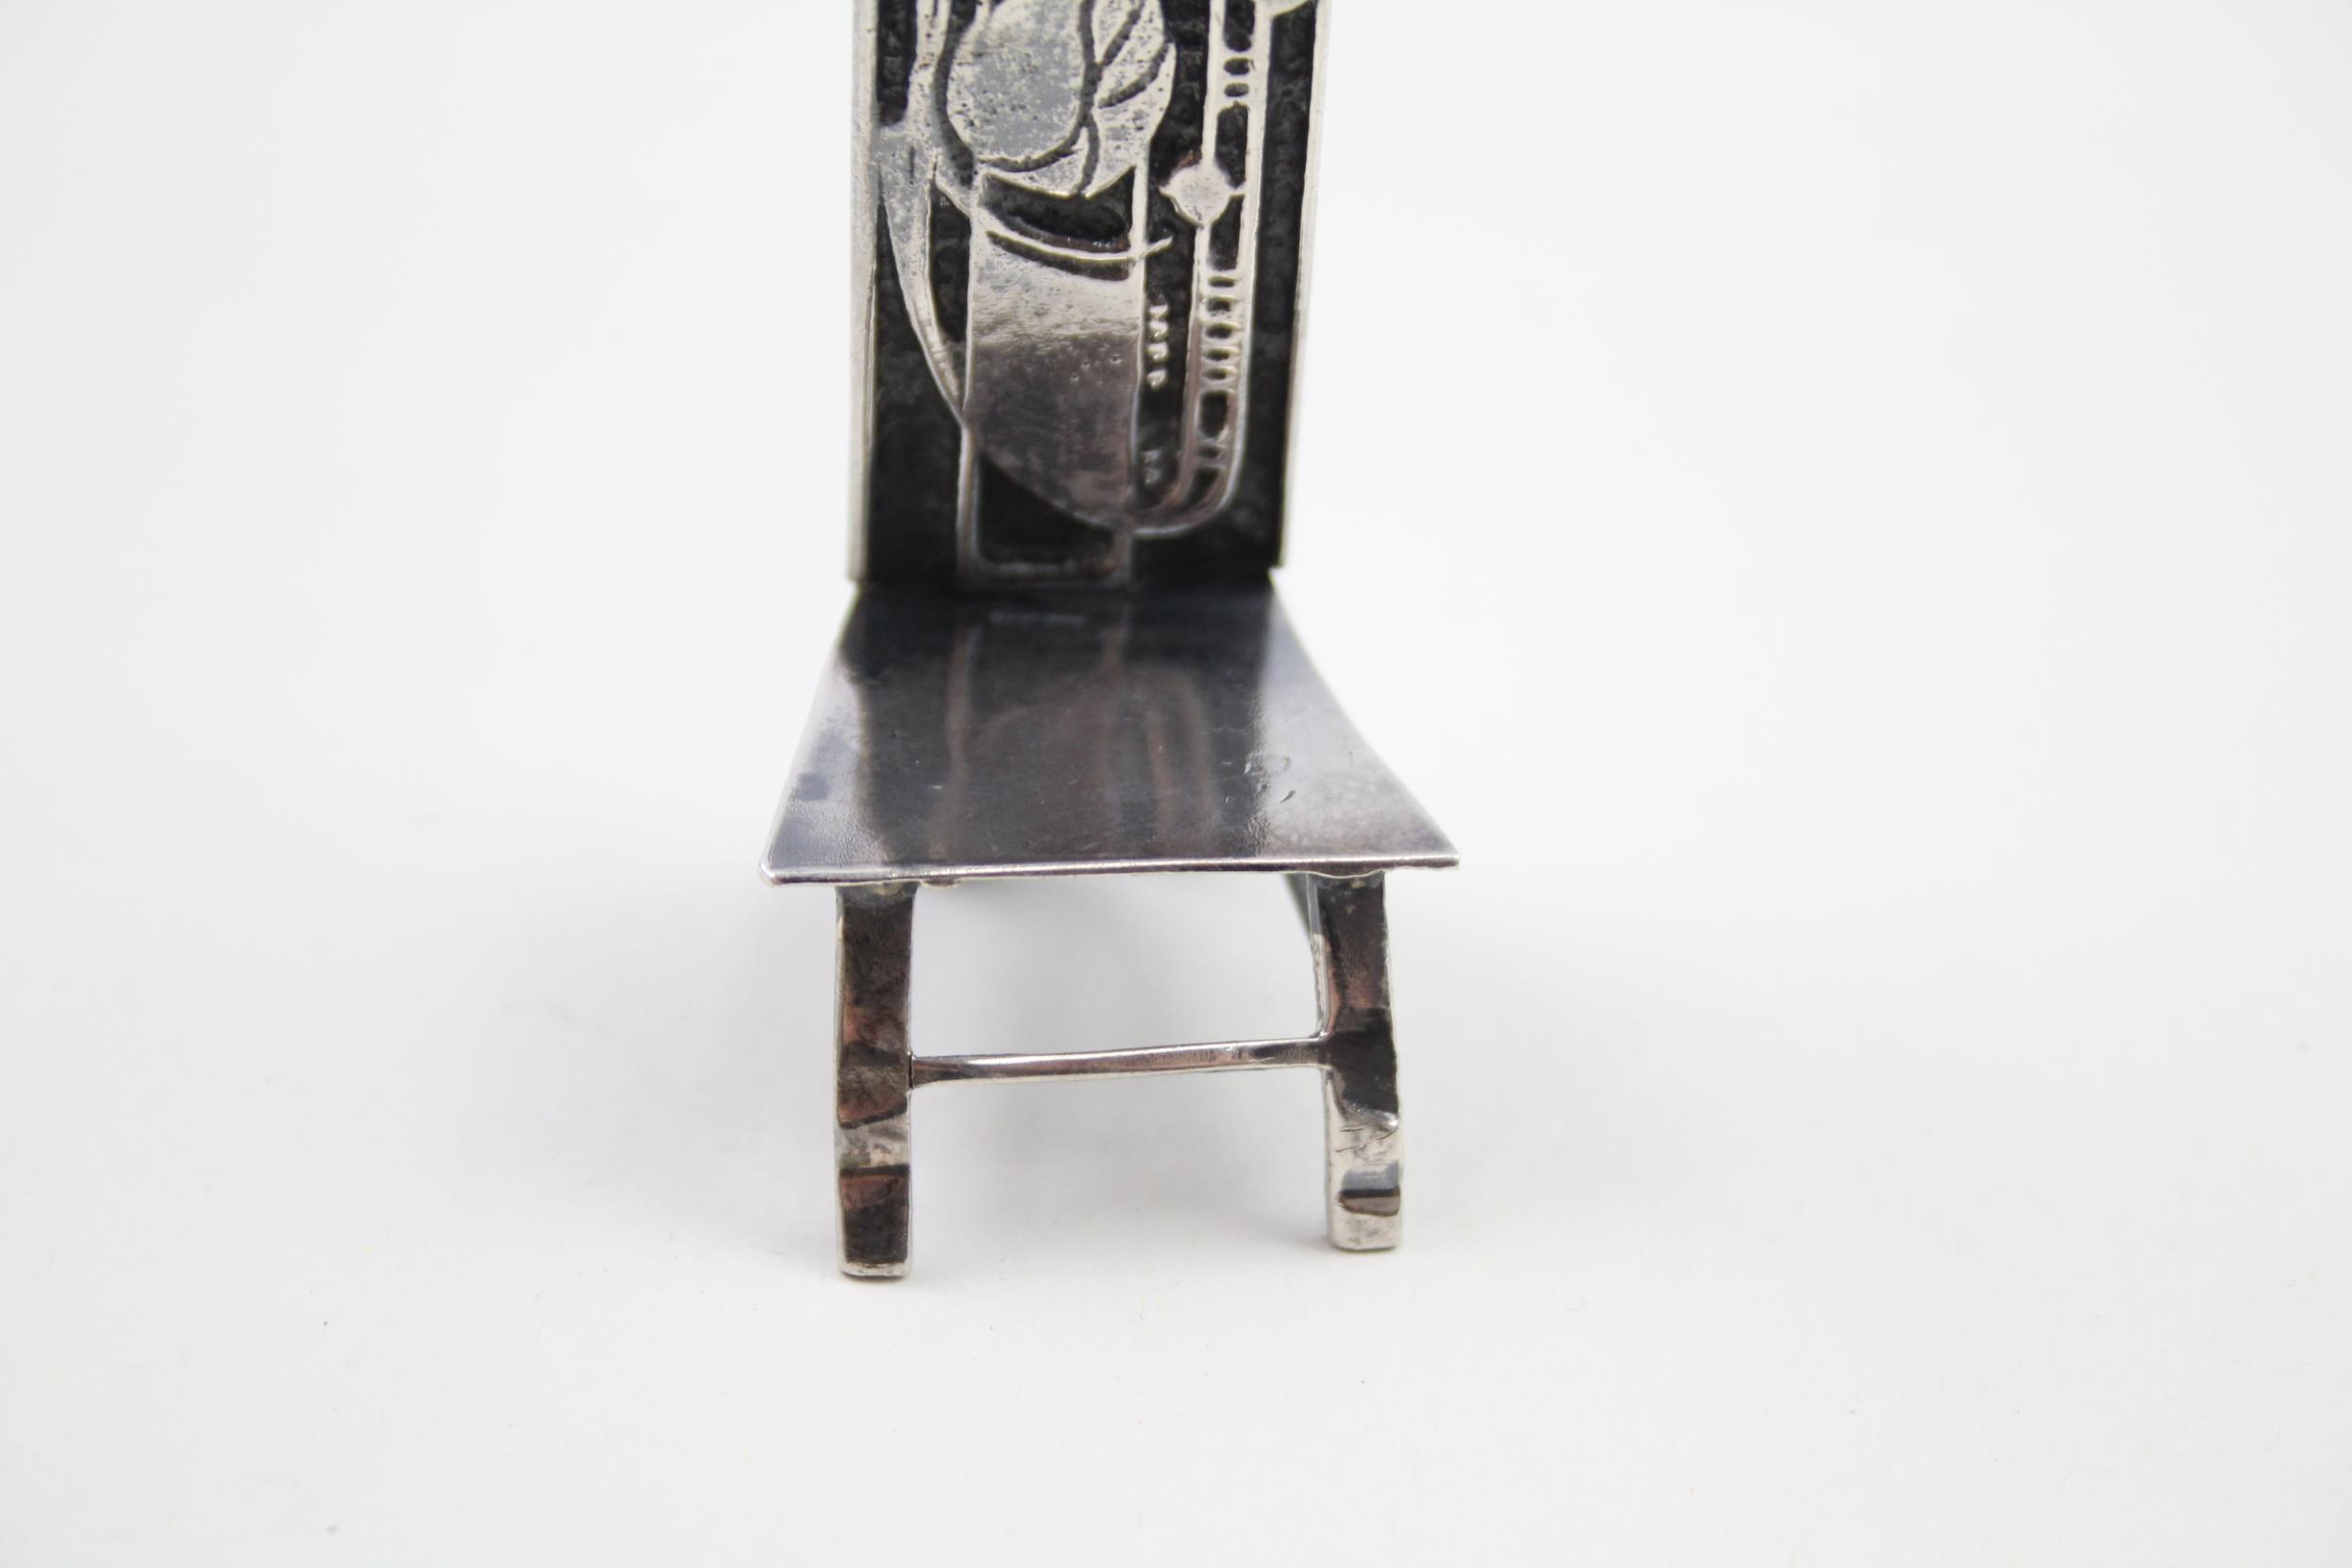 Vintage .950 Silver Art Nouveau Style Miniature Chair (43g) - XRF TESTED FOR PURITY Height - 9cm - Image 4 of 7